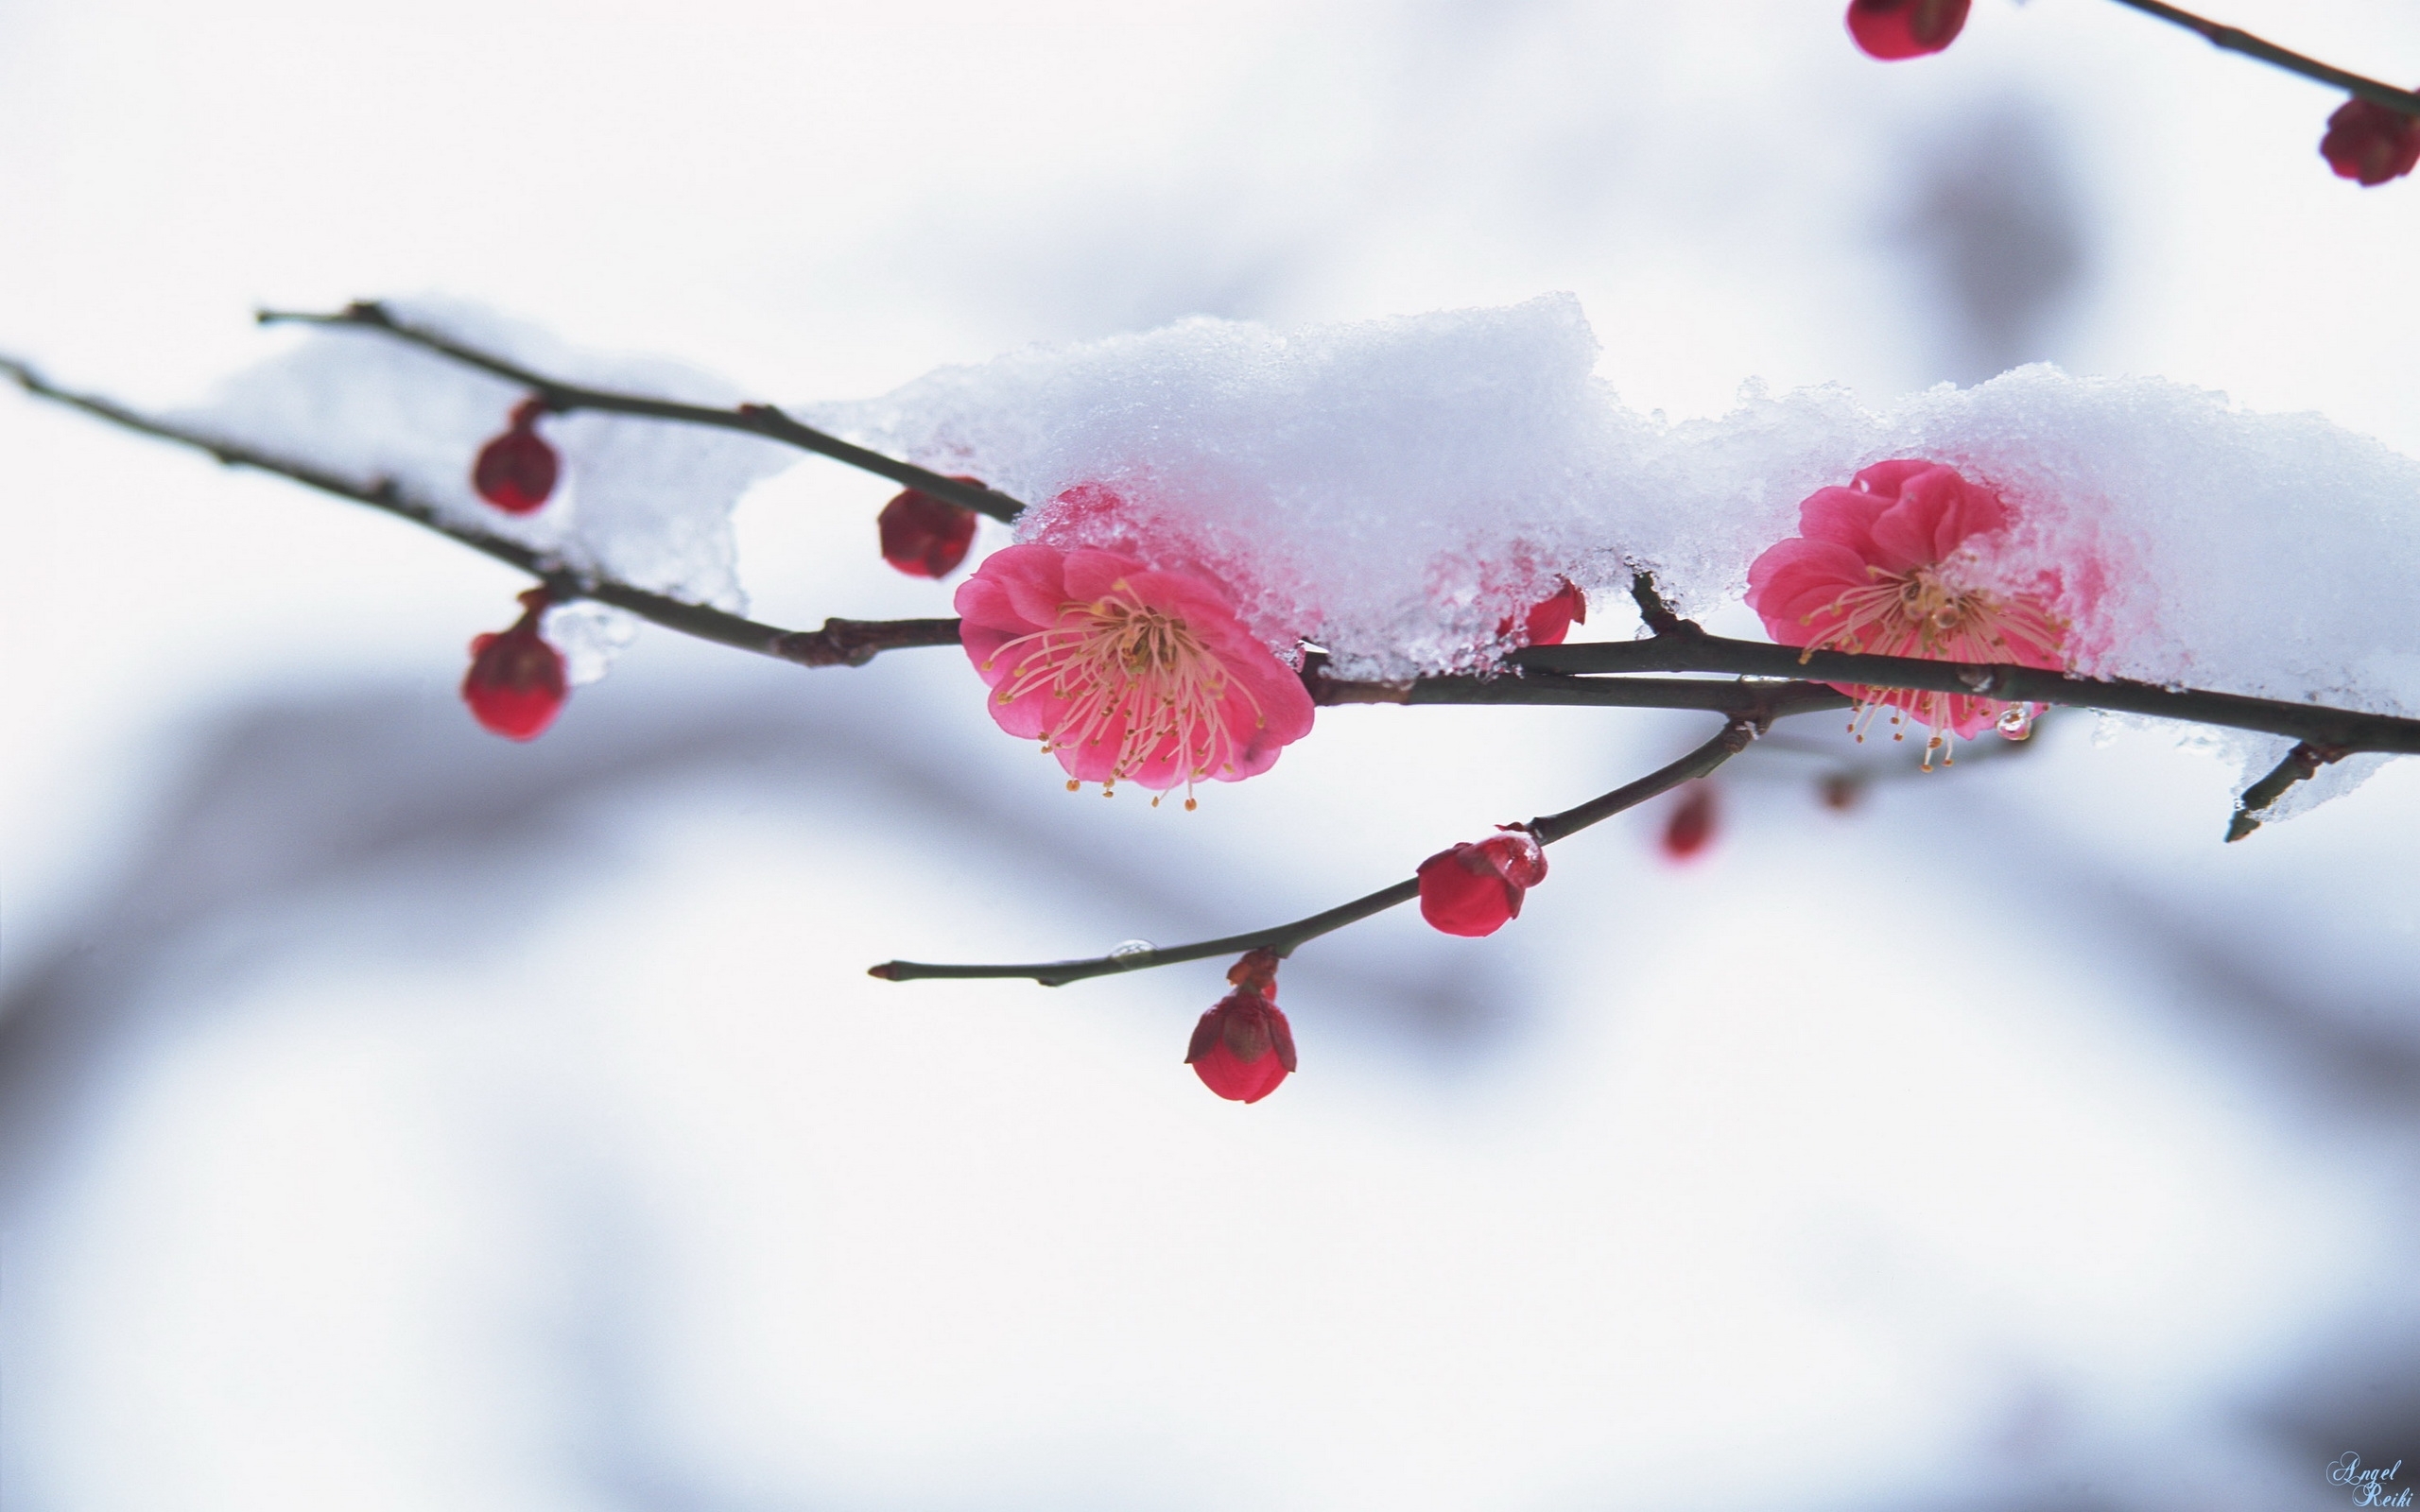 Mobile wallpaper: Plants, Winter, Flowers, Snow, 563 download the picture for free